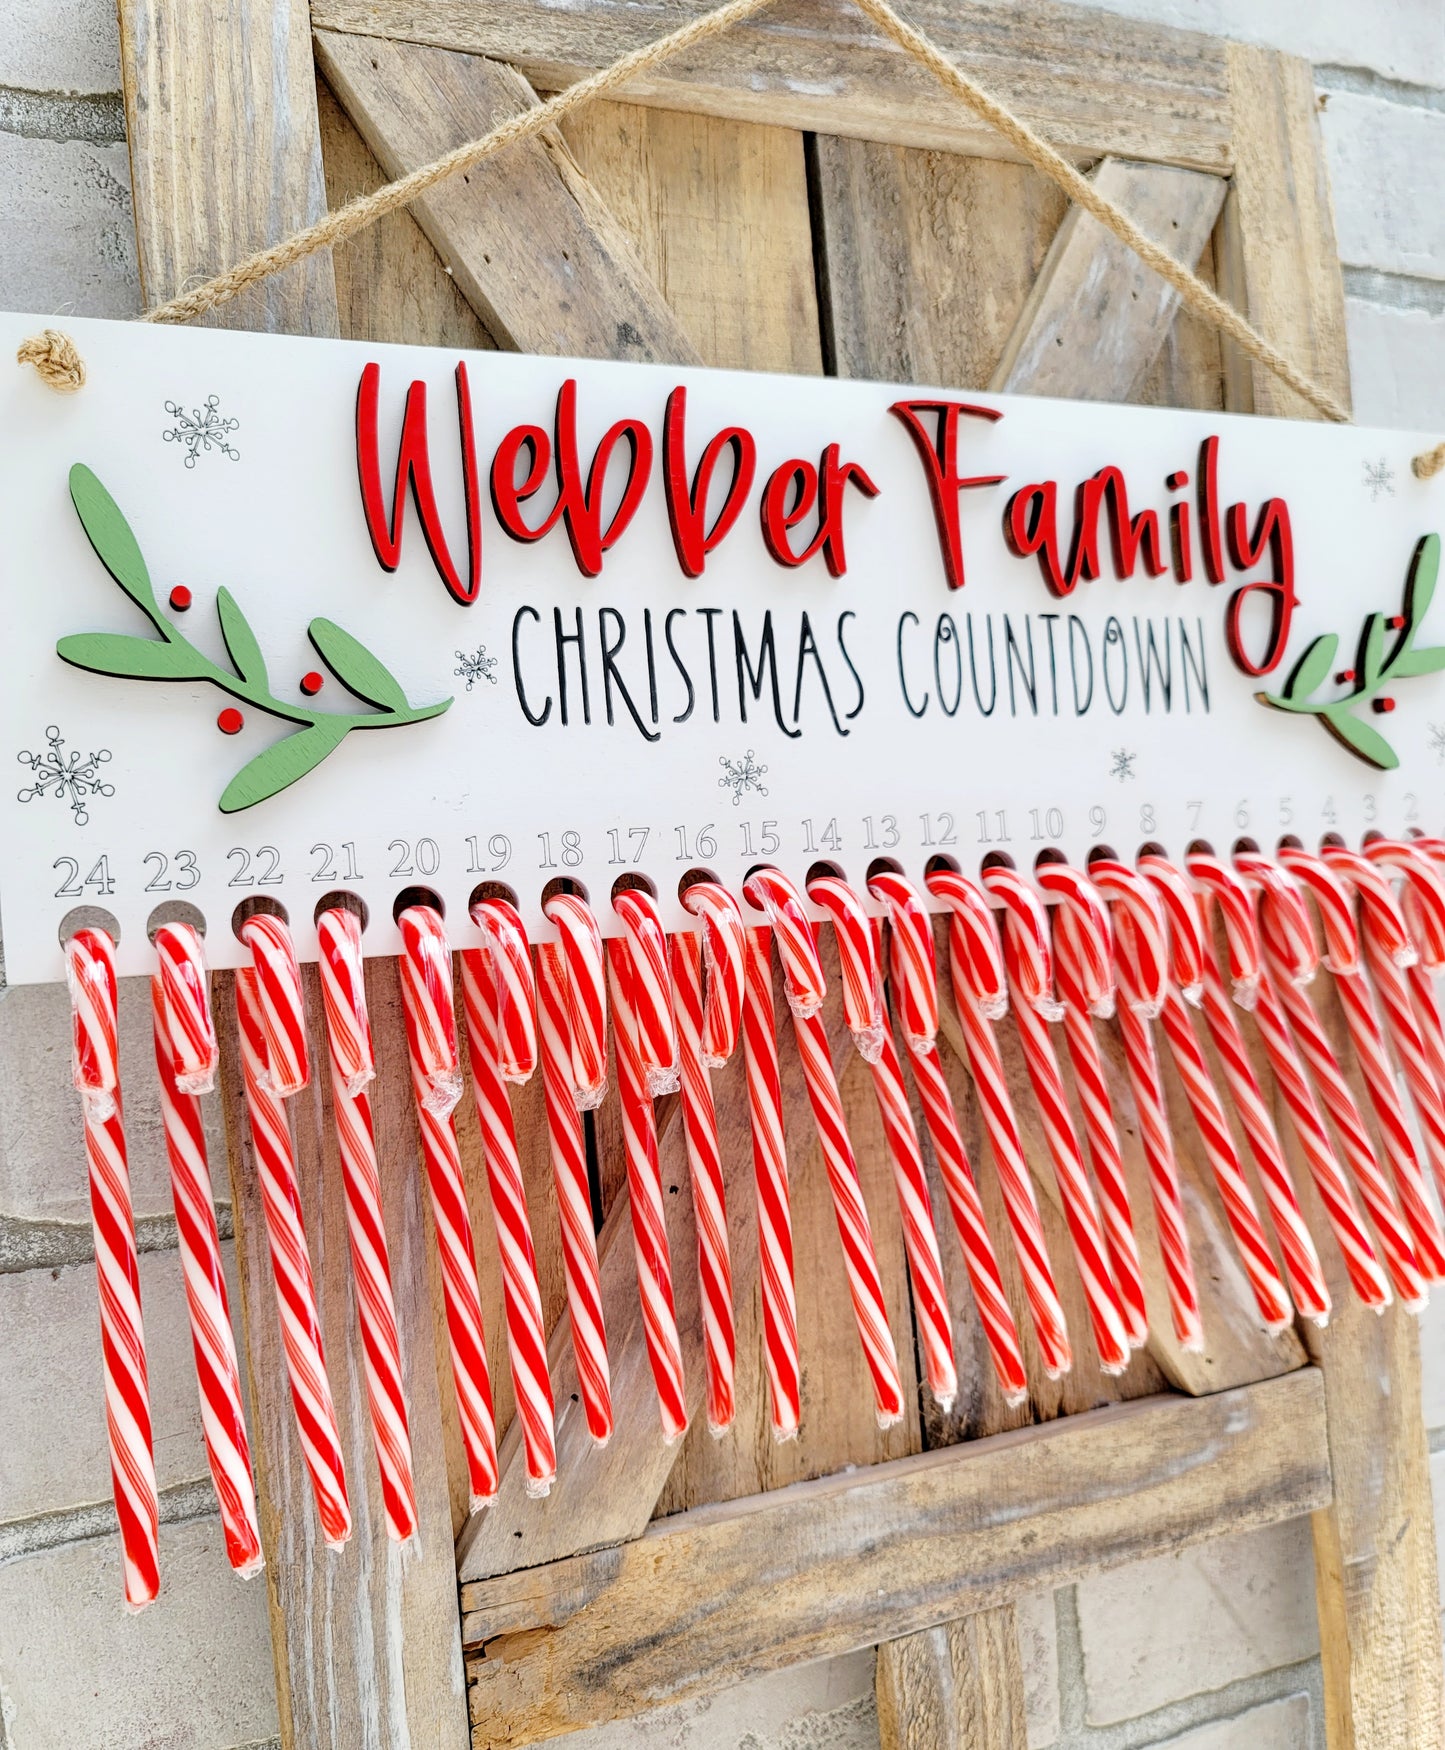 Family Candy Cane Countdown